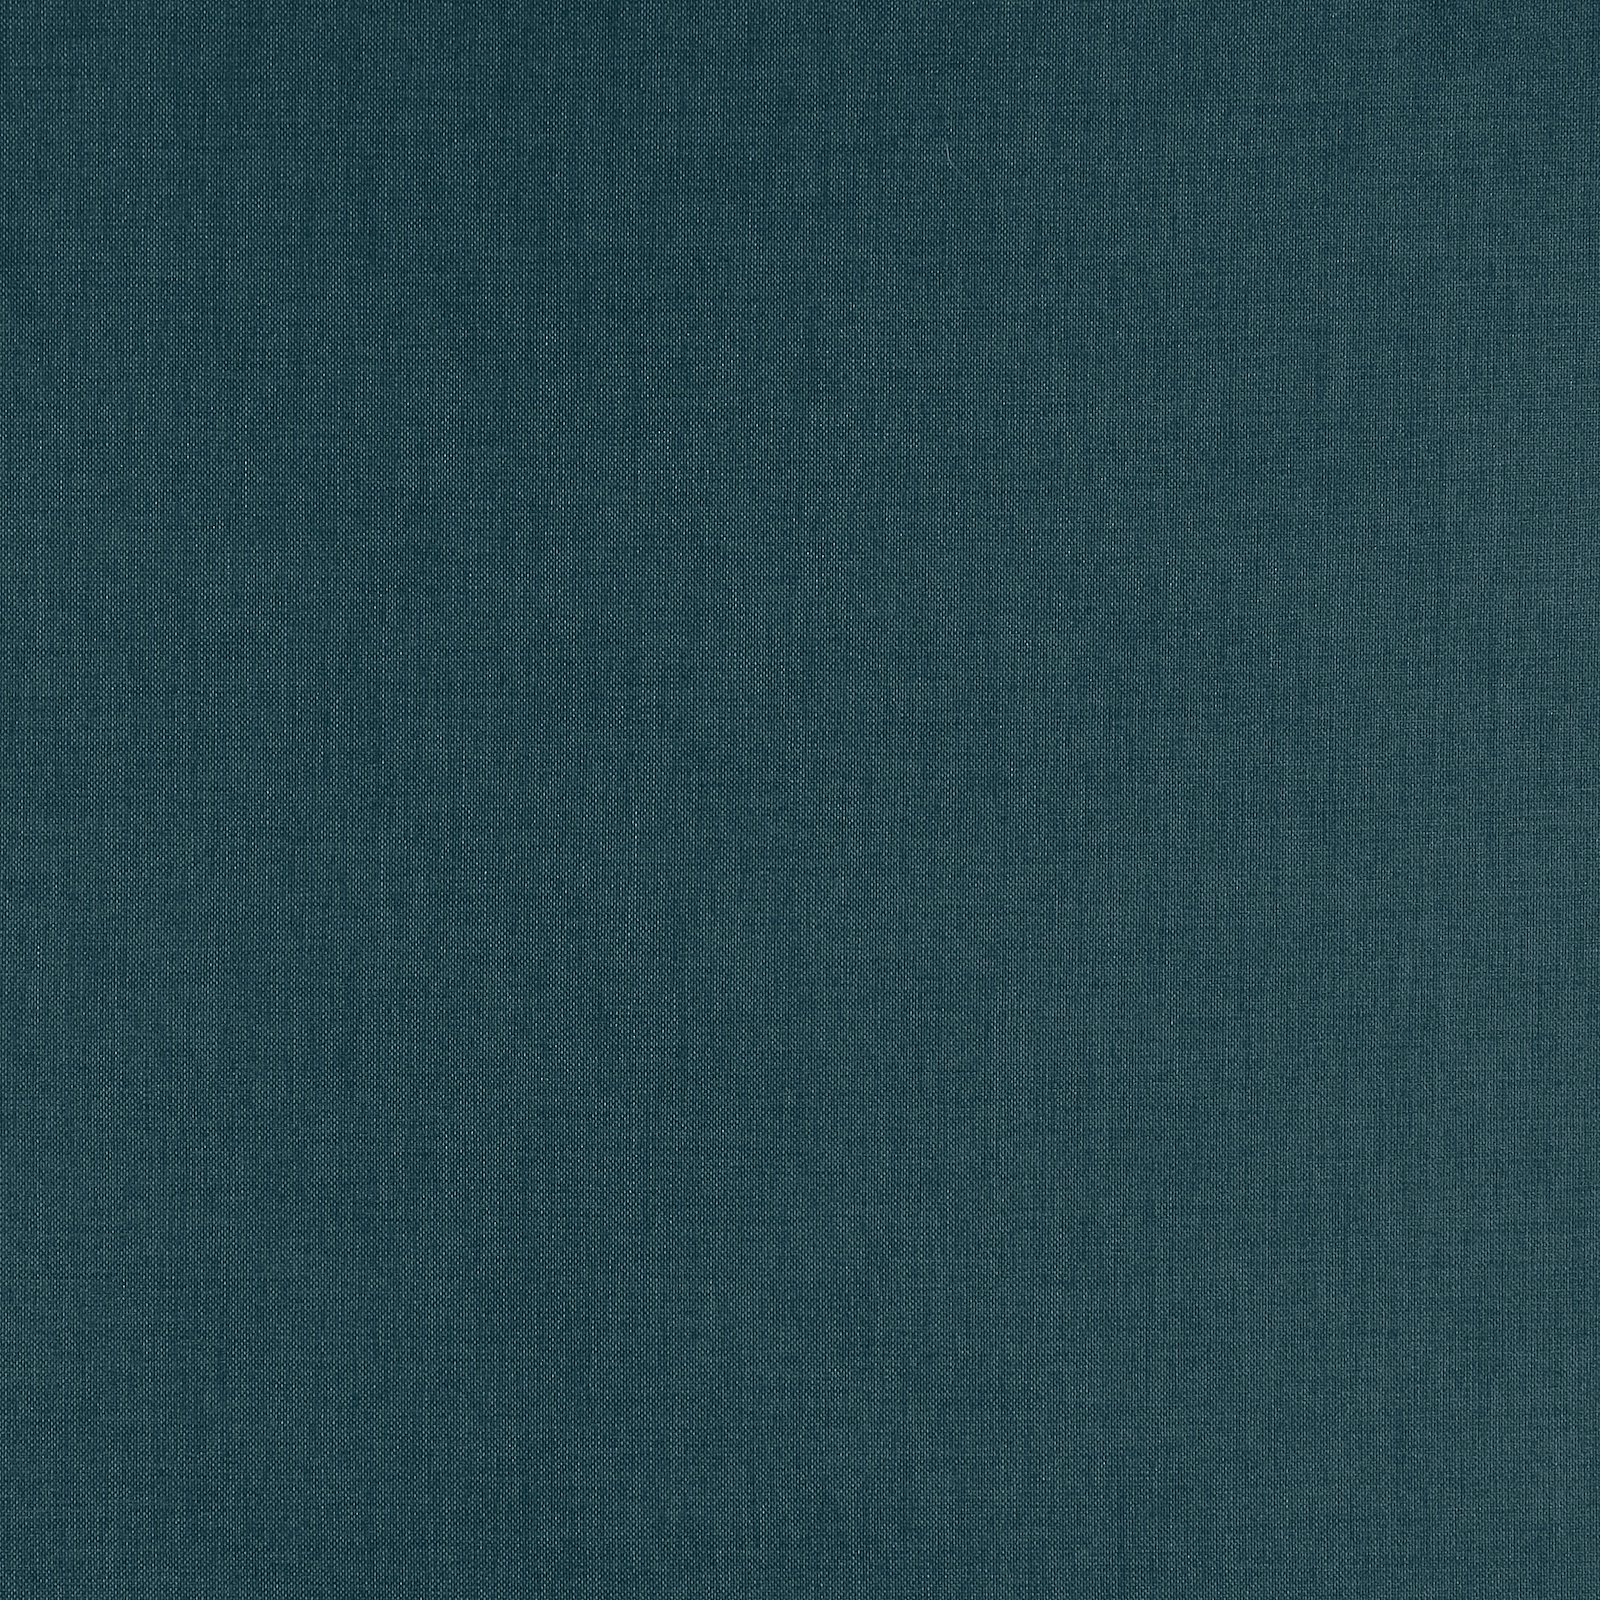 Upholstery fabric dark blue 820974_pack_solid